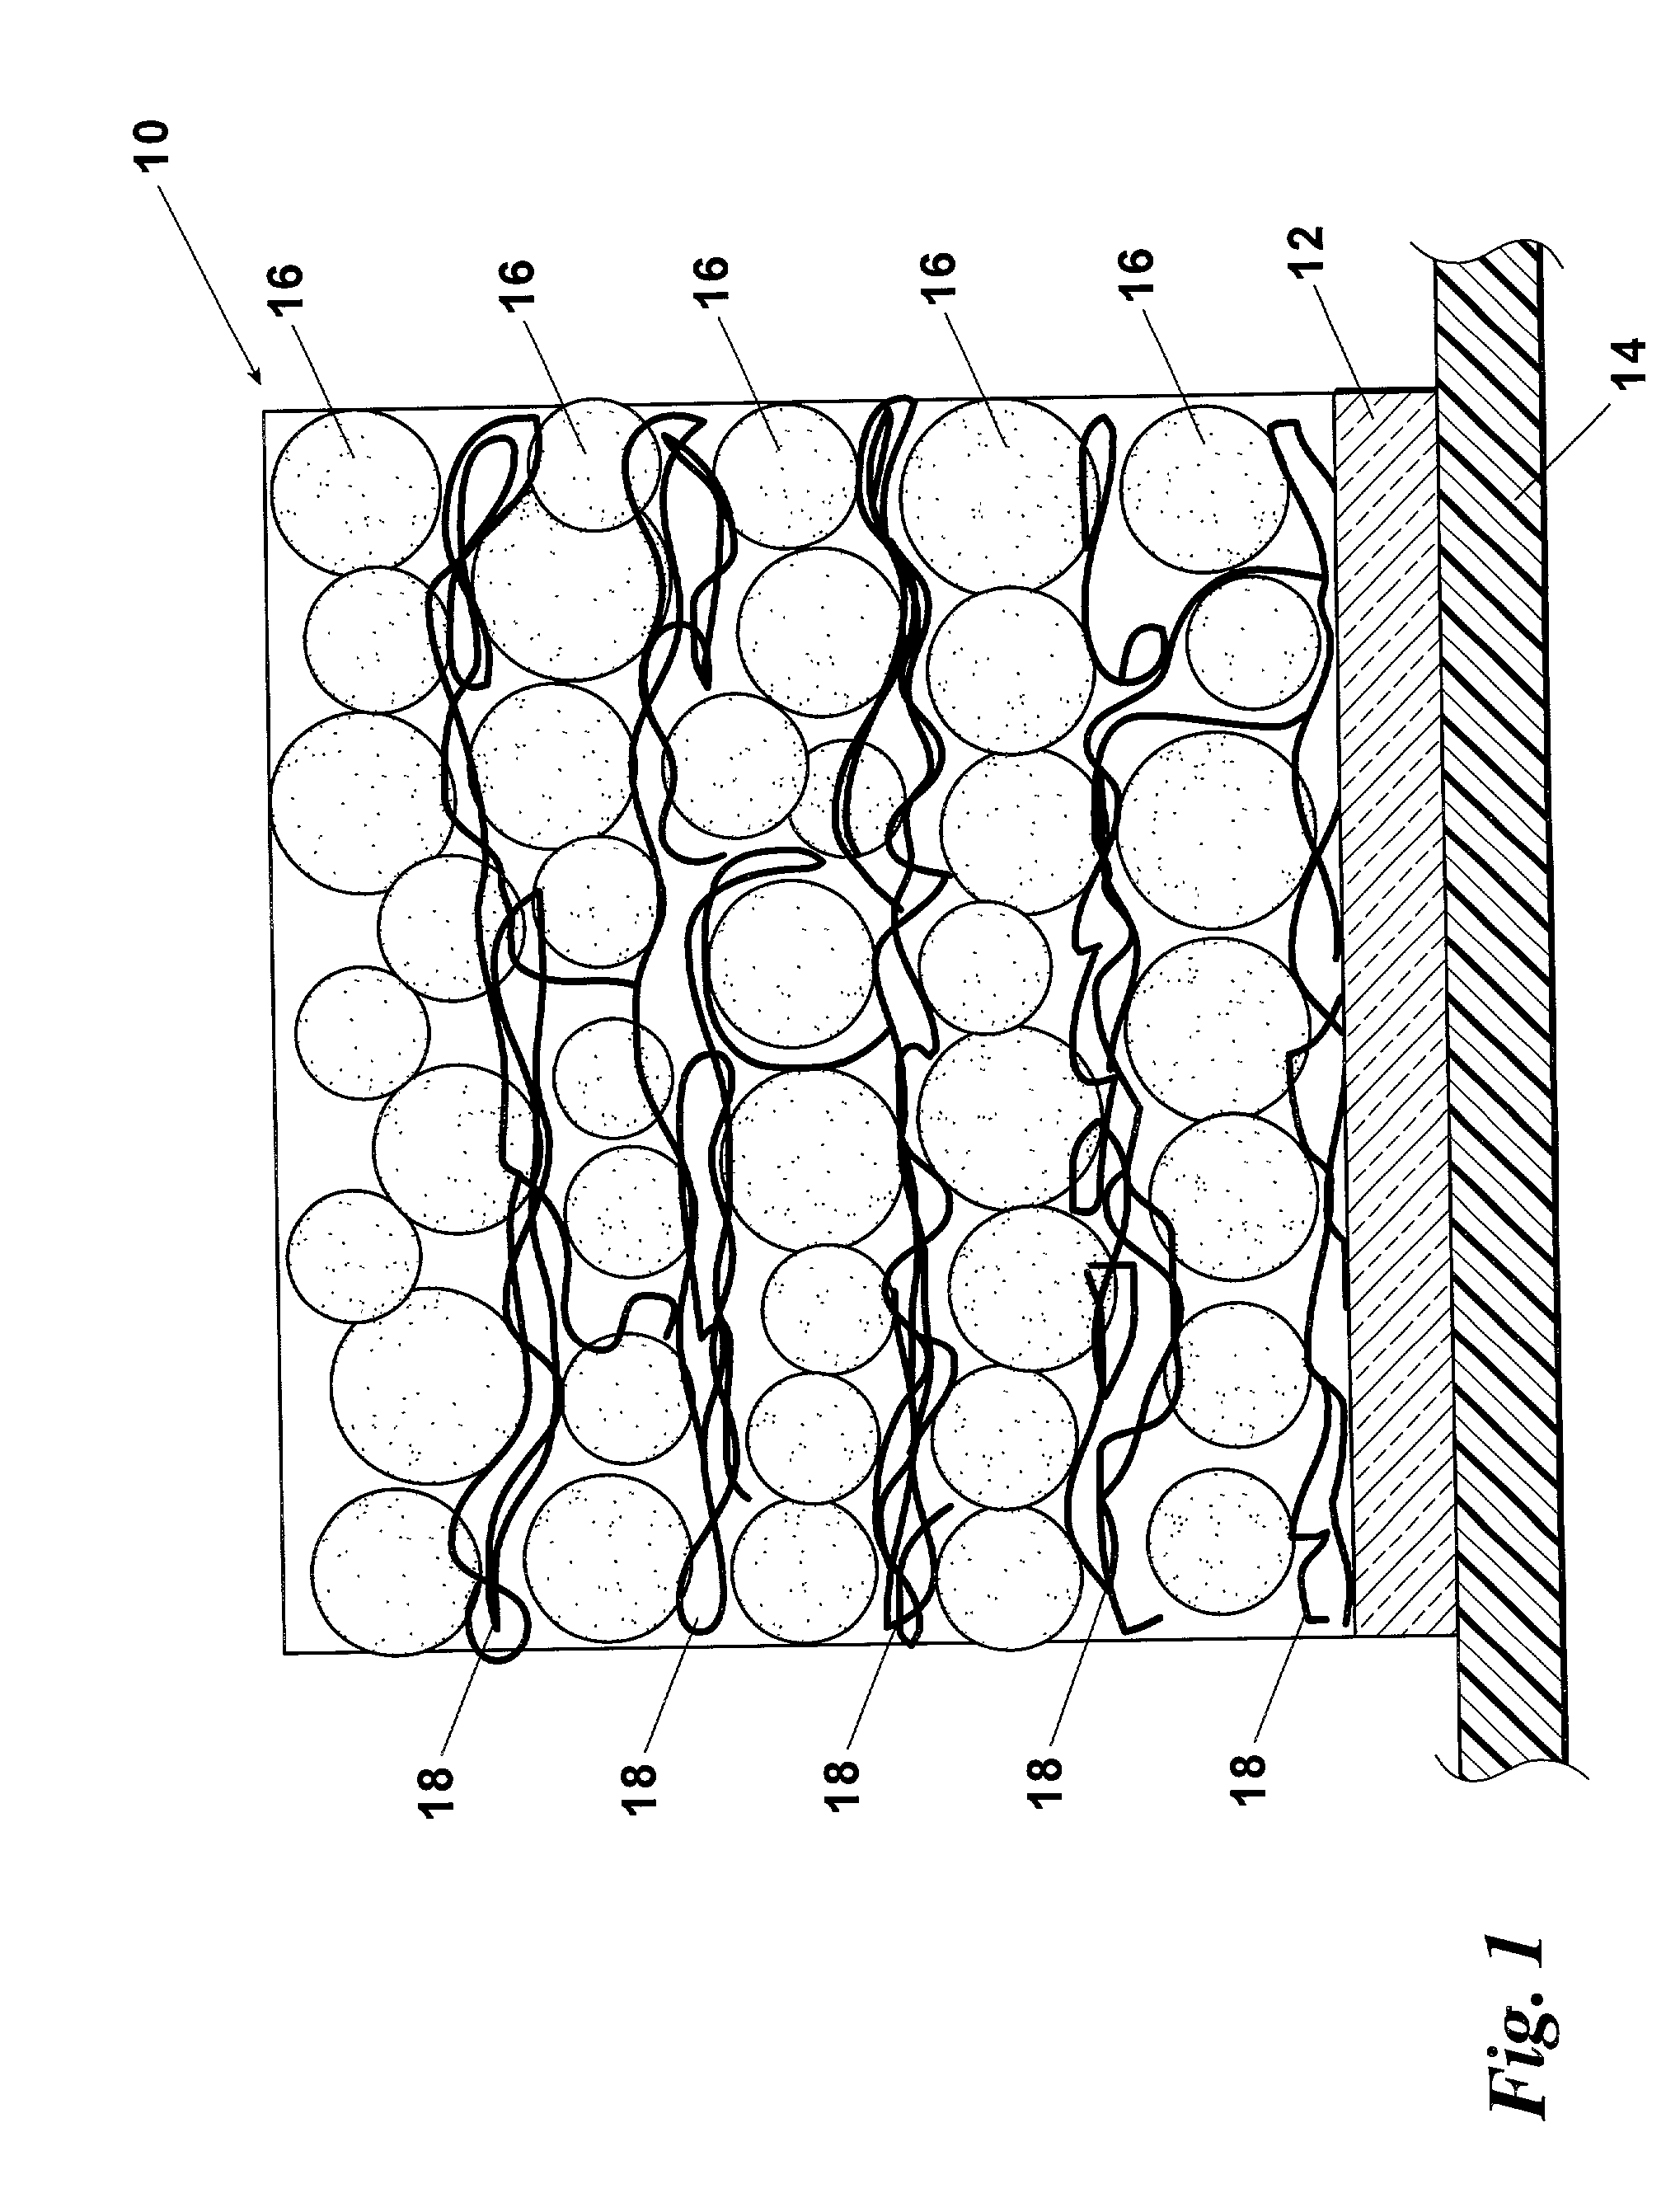 Assembly of free-standing films using a layer-by-layer process